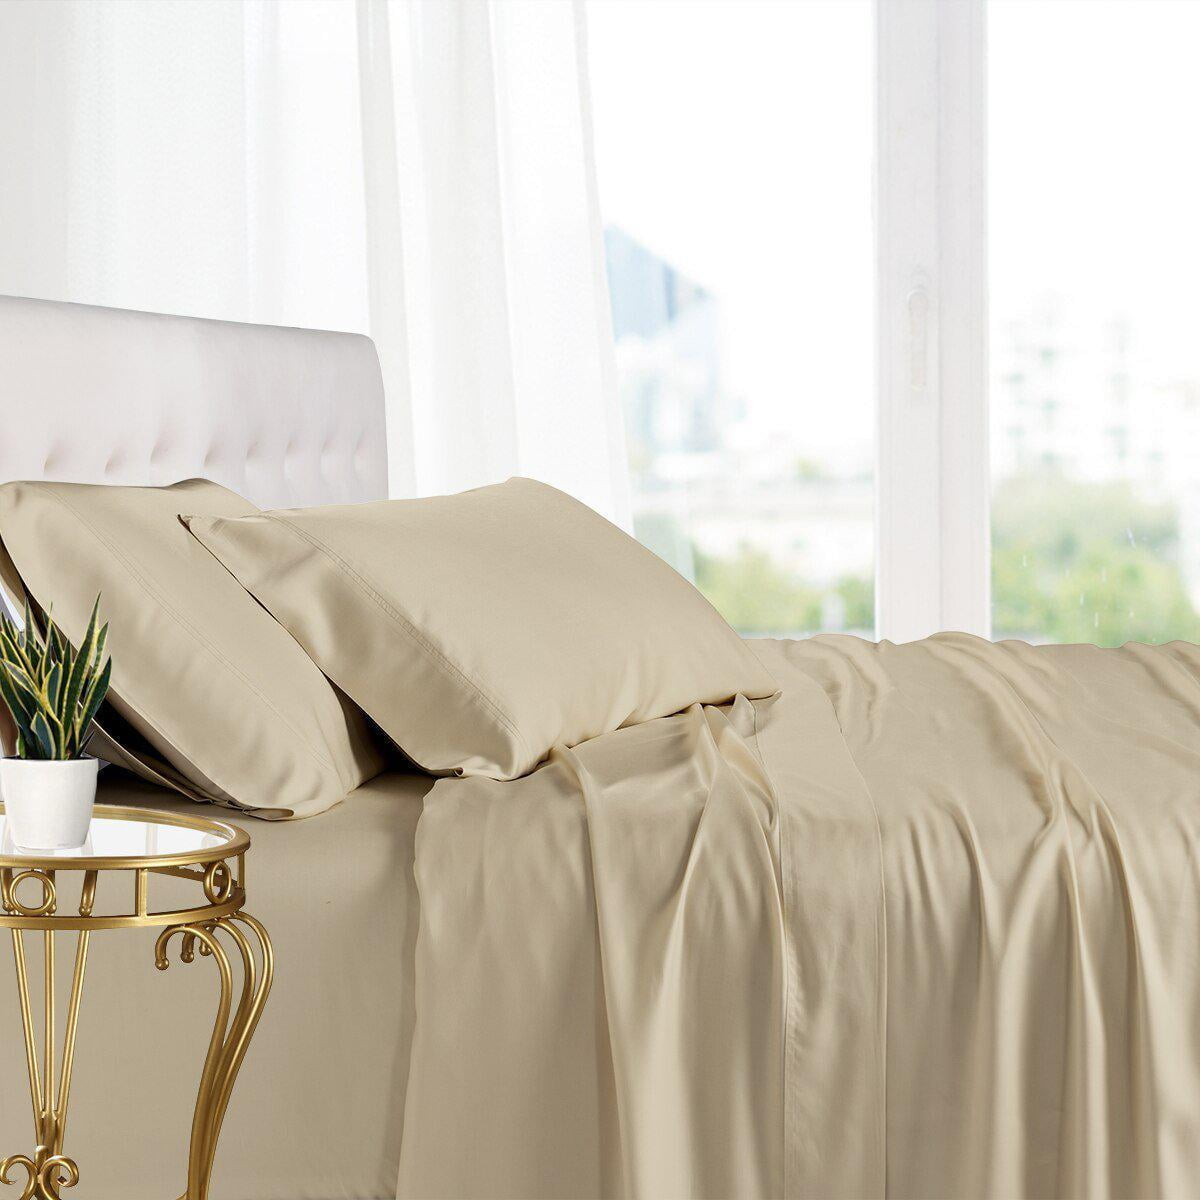 King Size Bamboo Sheet Sets Super Soft 100% Viscose from Bamboo-Color Ivory 